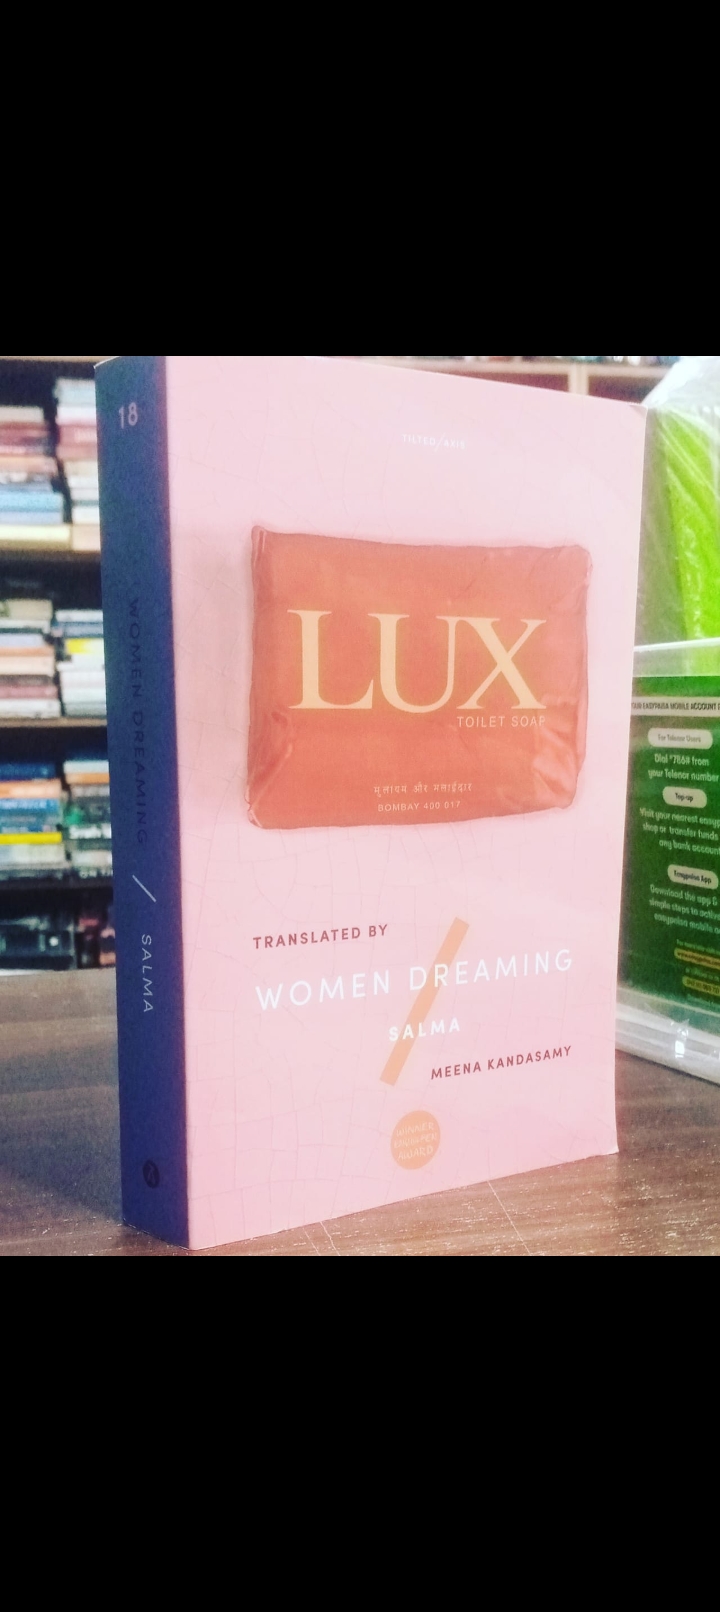 lux toilet soap translated by women dreaming salma by meena kandasamy. original like new paperback